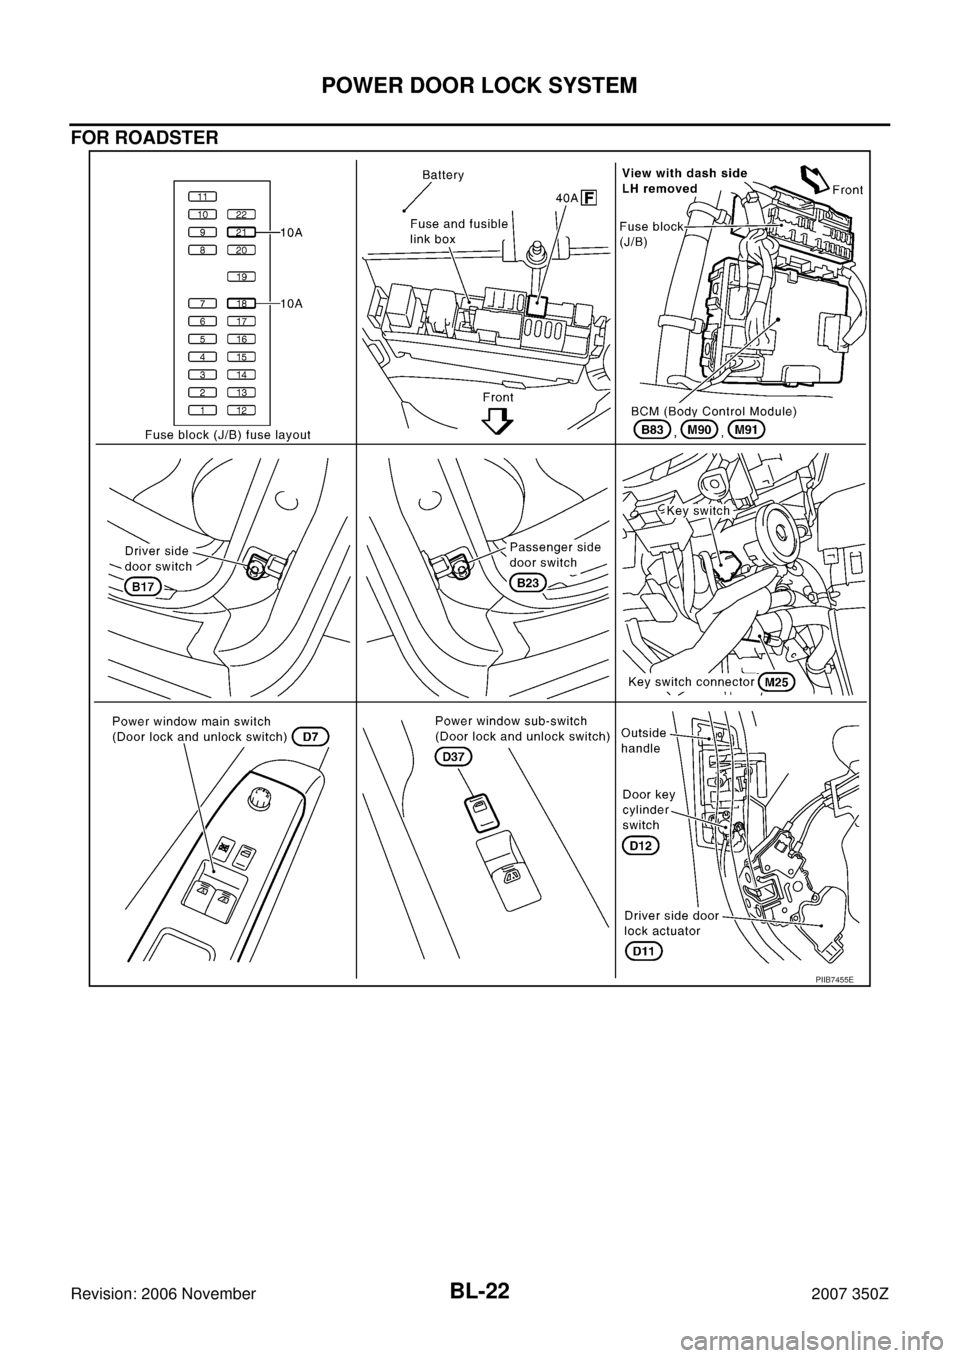 NISSAN 350Z 2007 Z33 Body, Lock And Security System Workshop Manual BL-22
POWER DOOR LOCK SYSTEM
Revision: 2006 November2007 350Z
FOR ROADSTER
PIIB7455E 